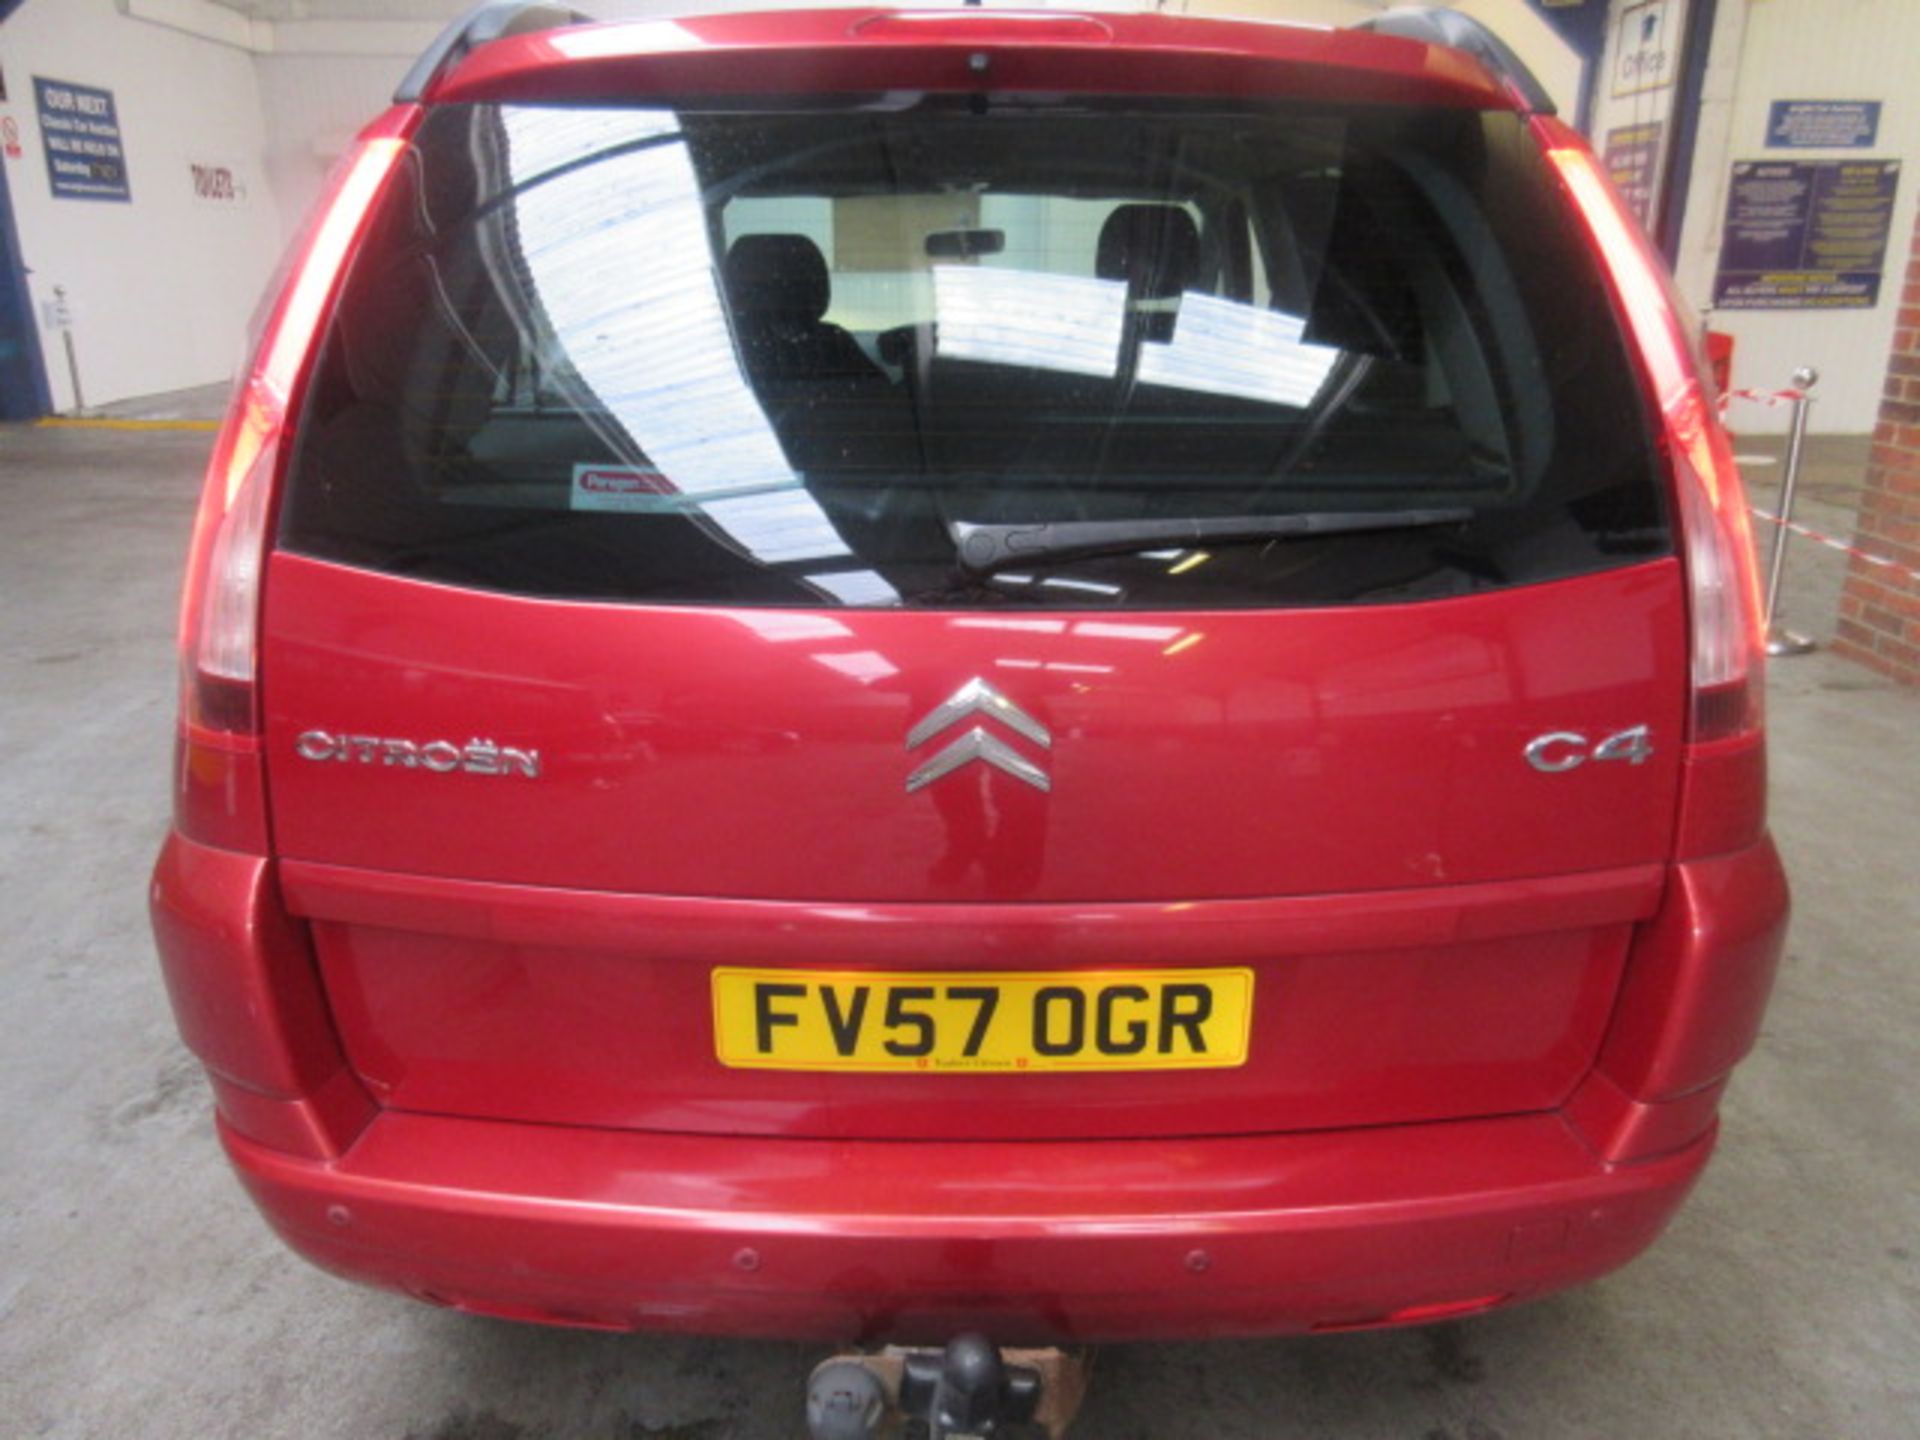 57 07 Citroen C4 Picasso 7 VTR+ HDI - Image 2 of 7